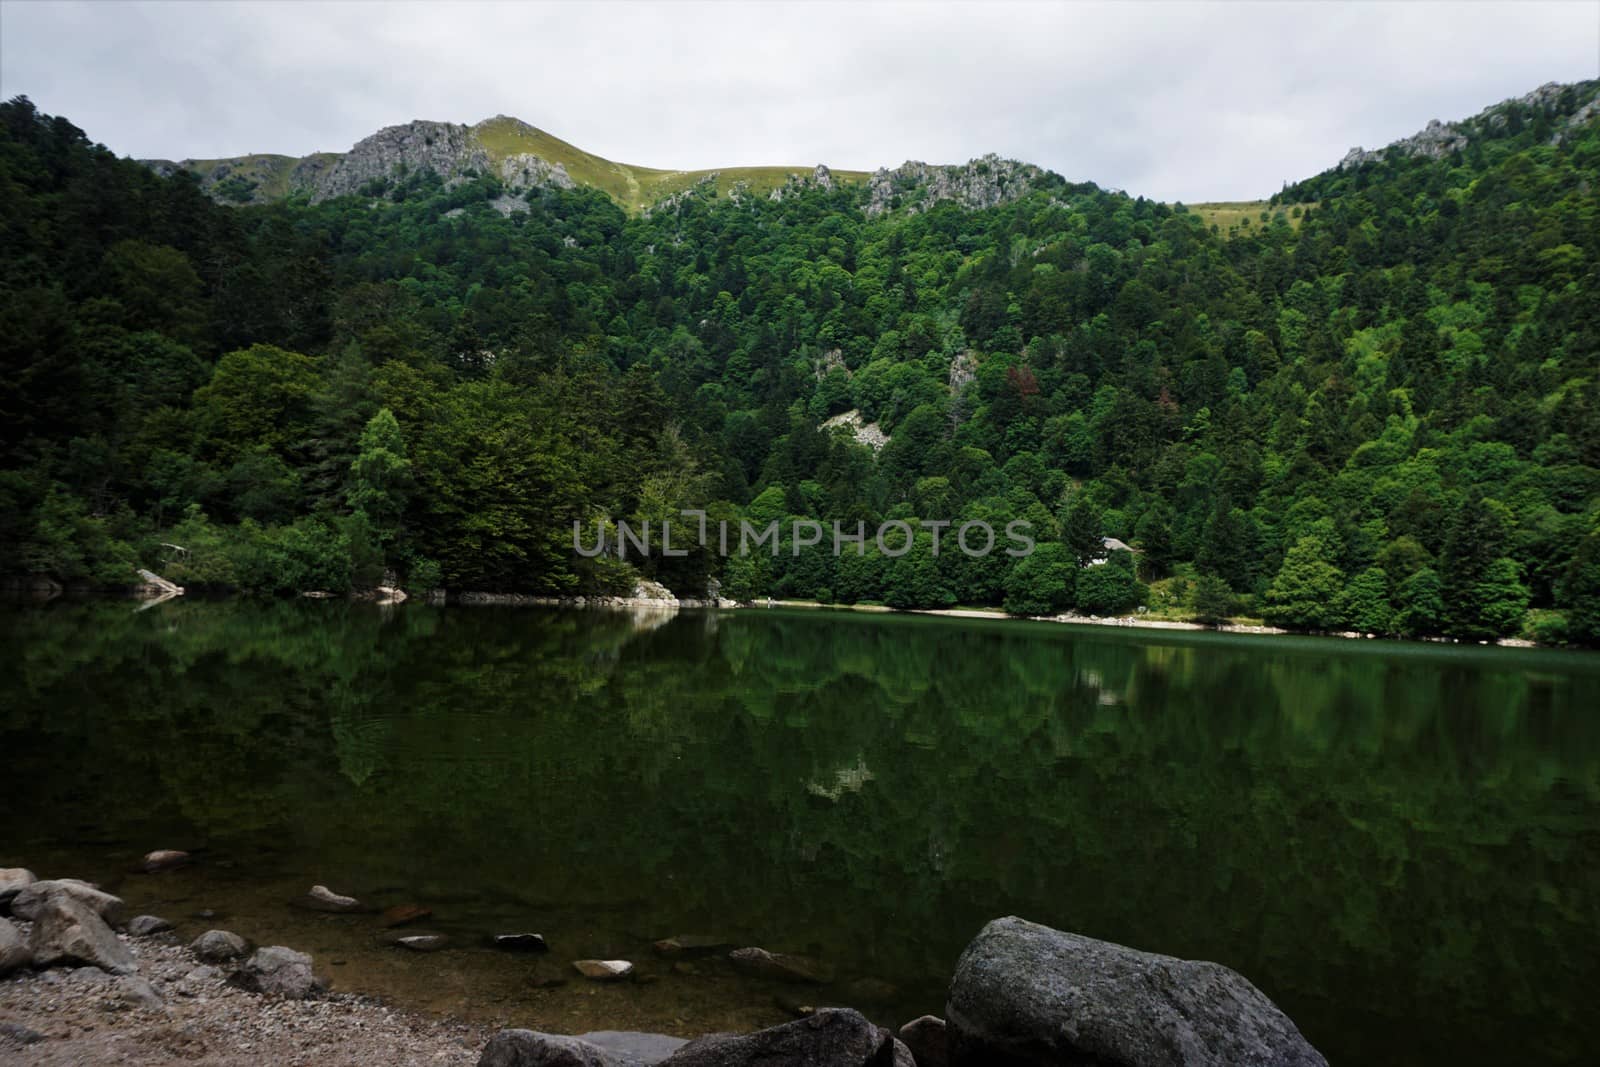 Lac de Schiessrothried - a beautiful lake surrounded by forrest and mountains